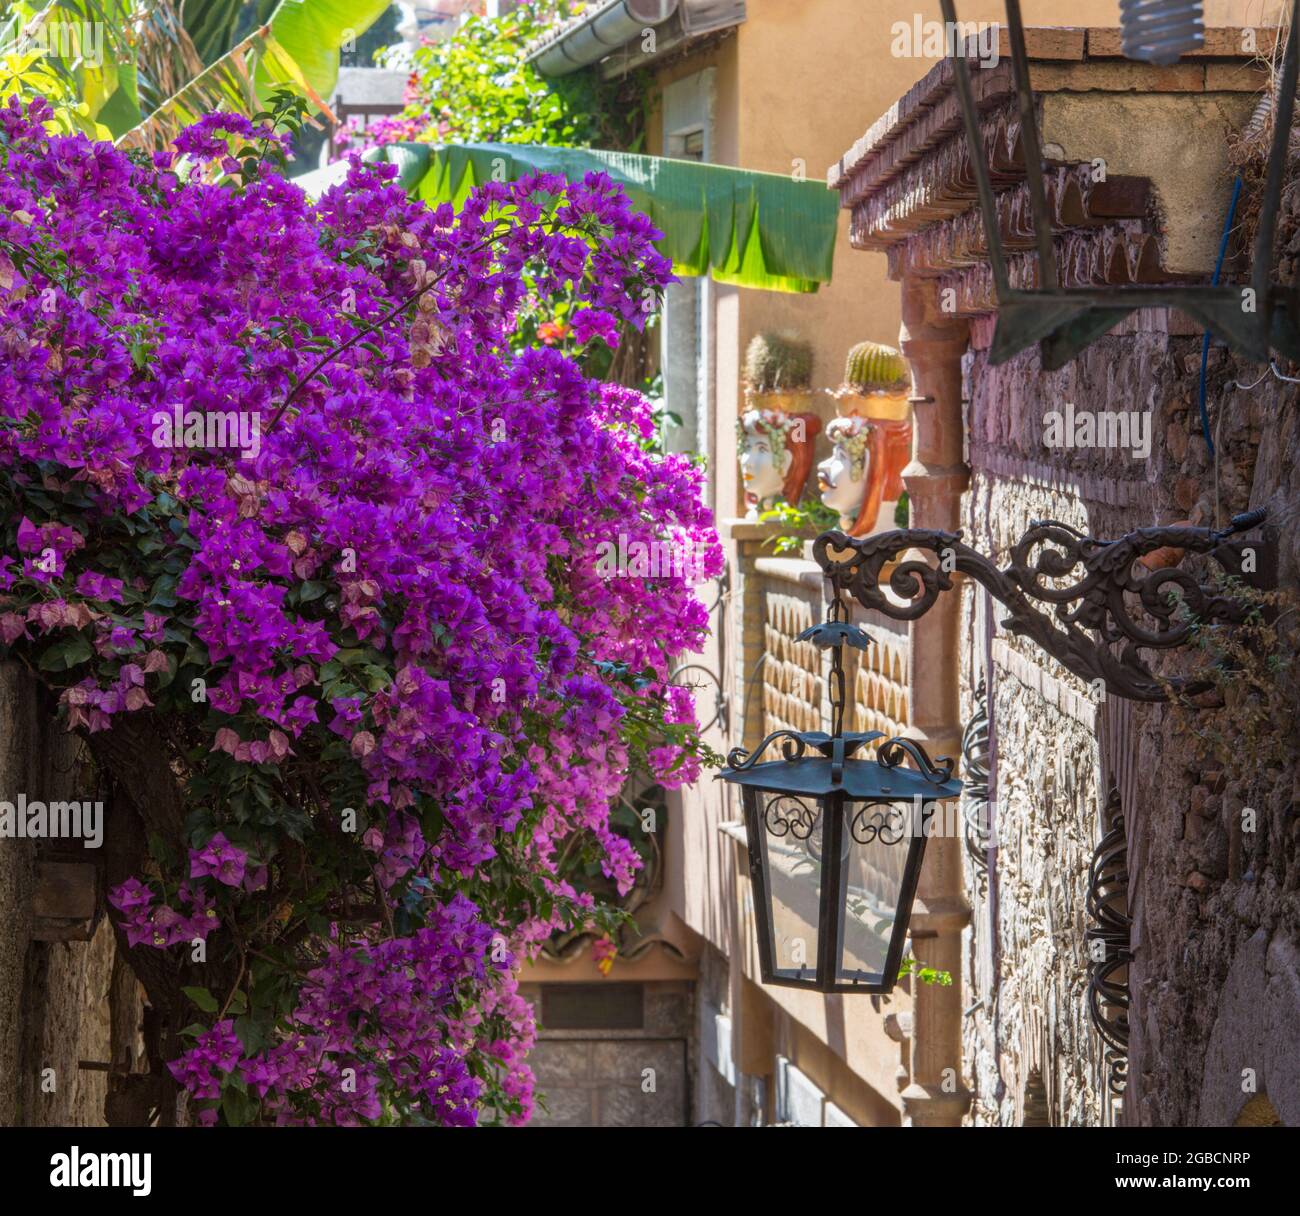 Taormina, Messina, Sicily, Italy. Typical flower-filled alley off Corso Umberto I, high stone wall draped in stunning pink bougainvillea. Stock Photo